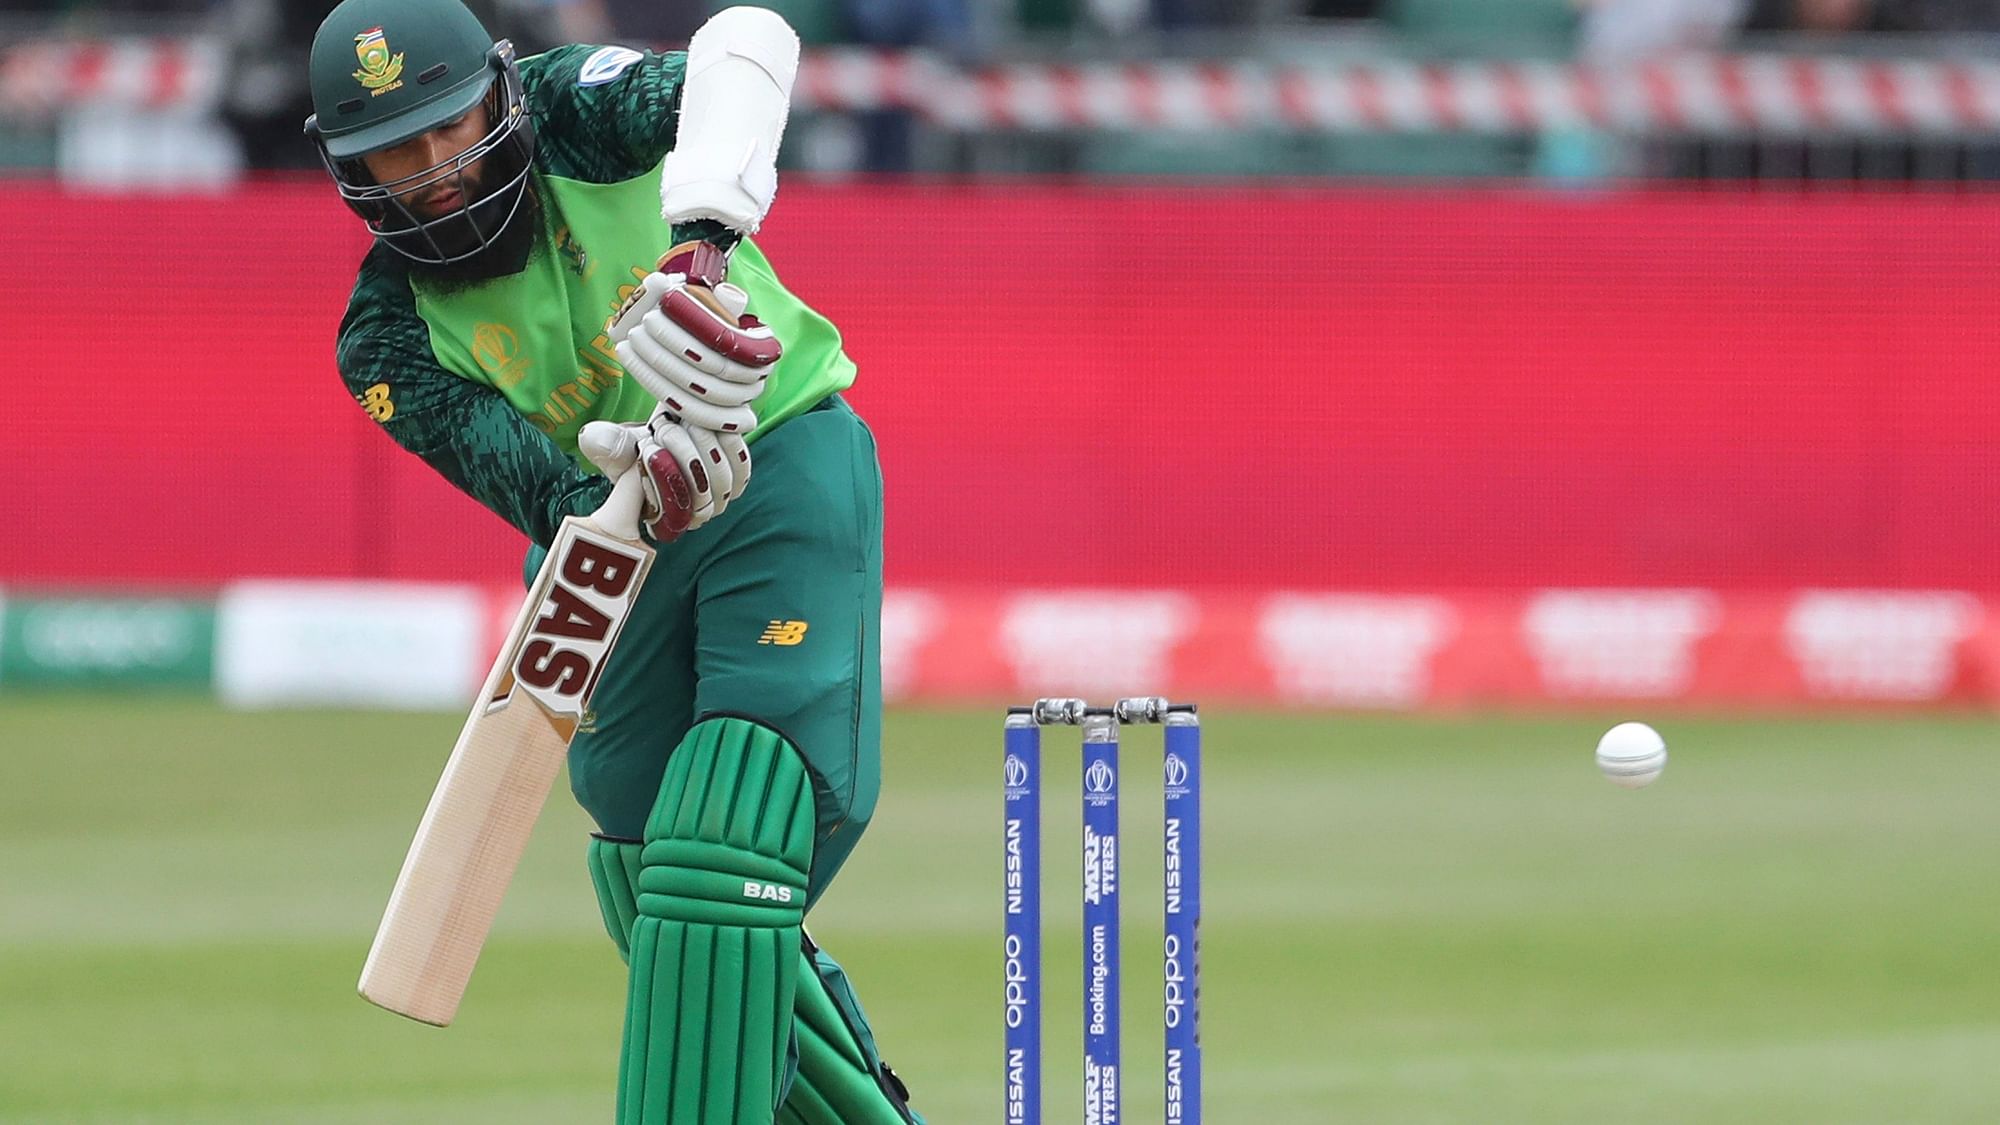  Hashim Amla plays a shot during the ICC World Cup warm-up match between West Indies and South Africa.&nbsp;